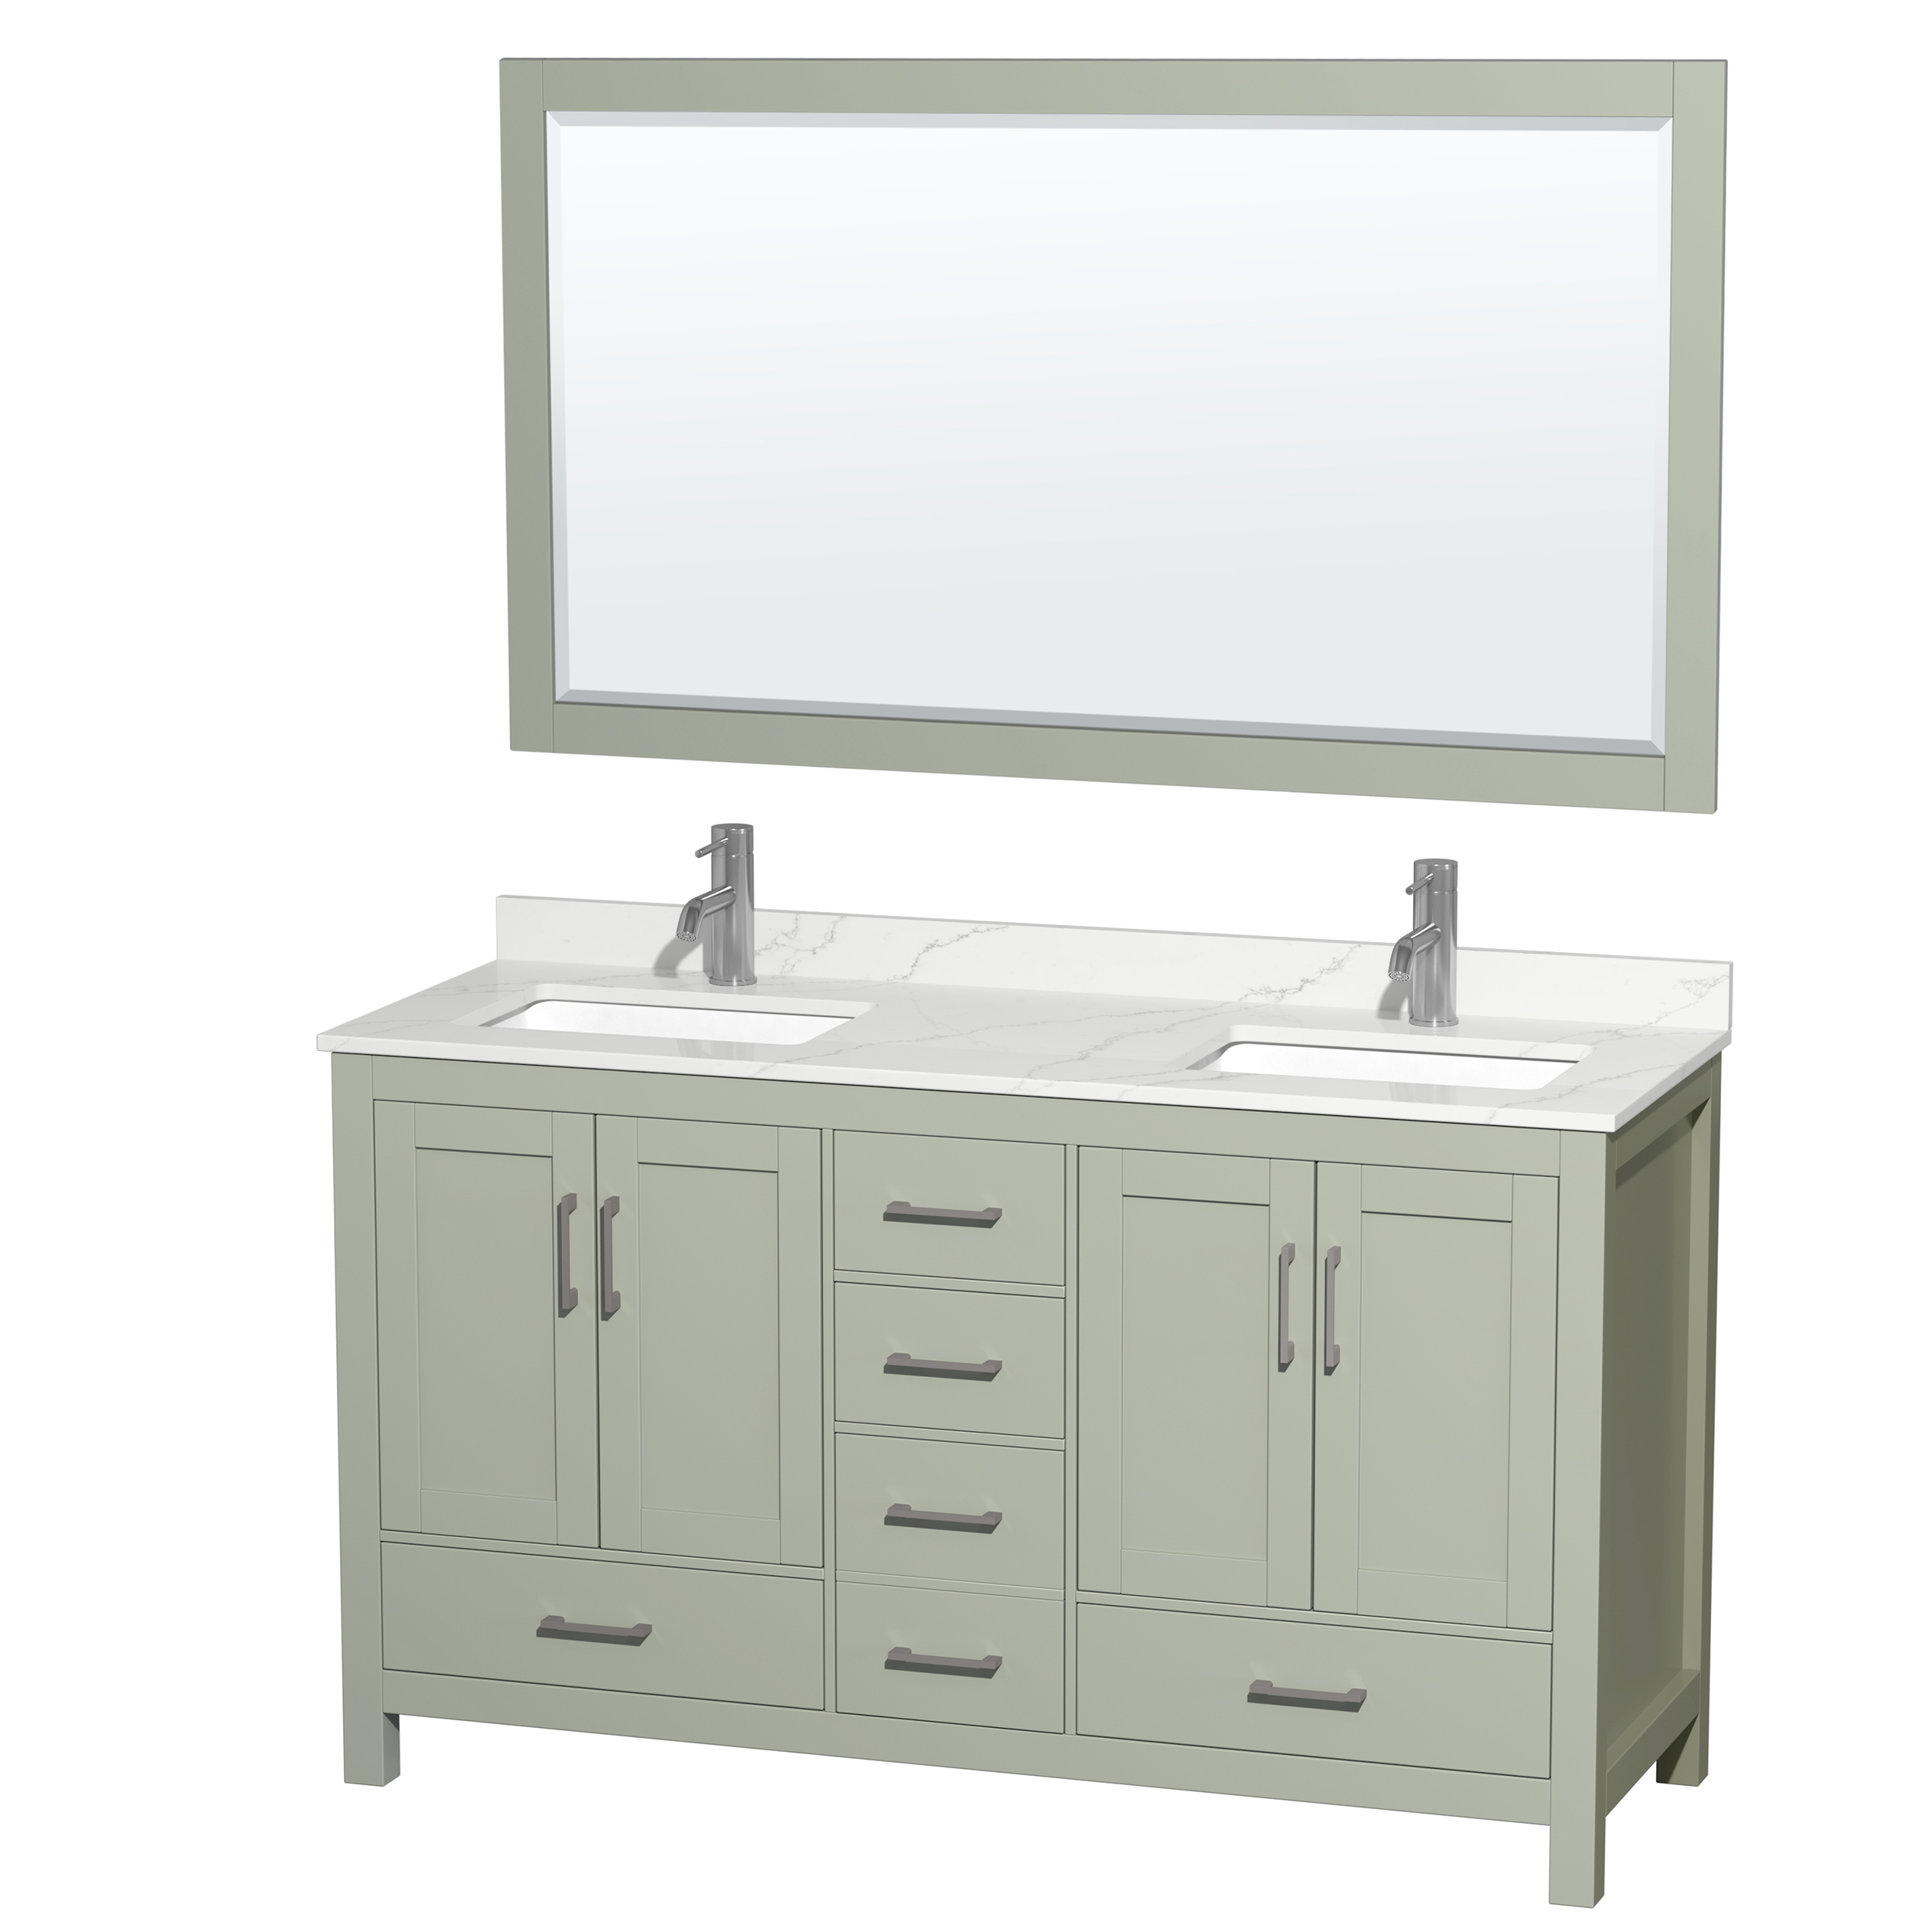 Sheffield 60" Double Bathroom Vanity by Wyndham Collection - White WC-1414-60-DBL-VAN-WHT